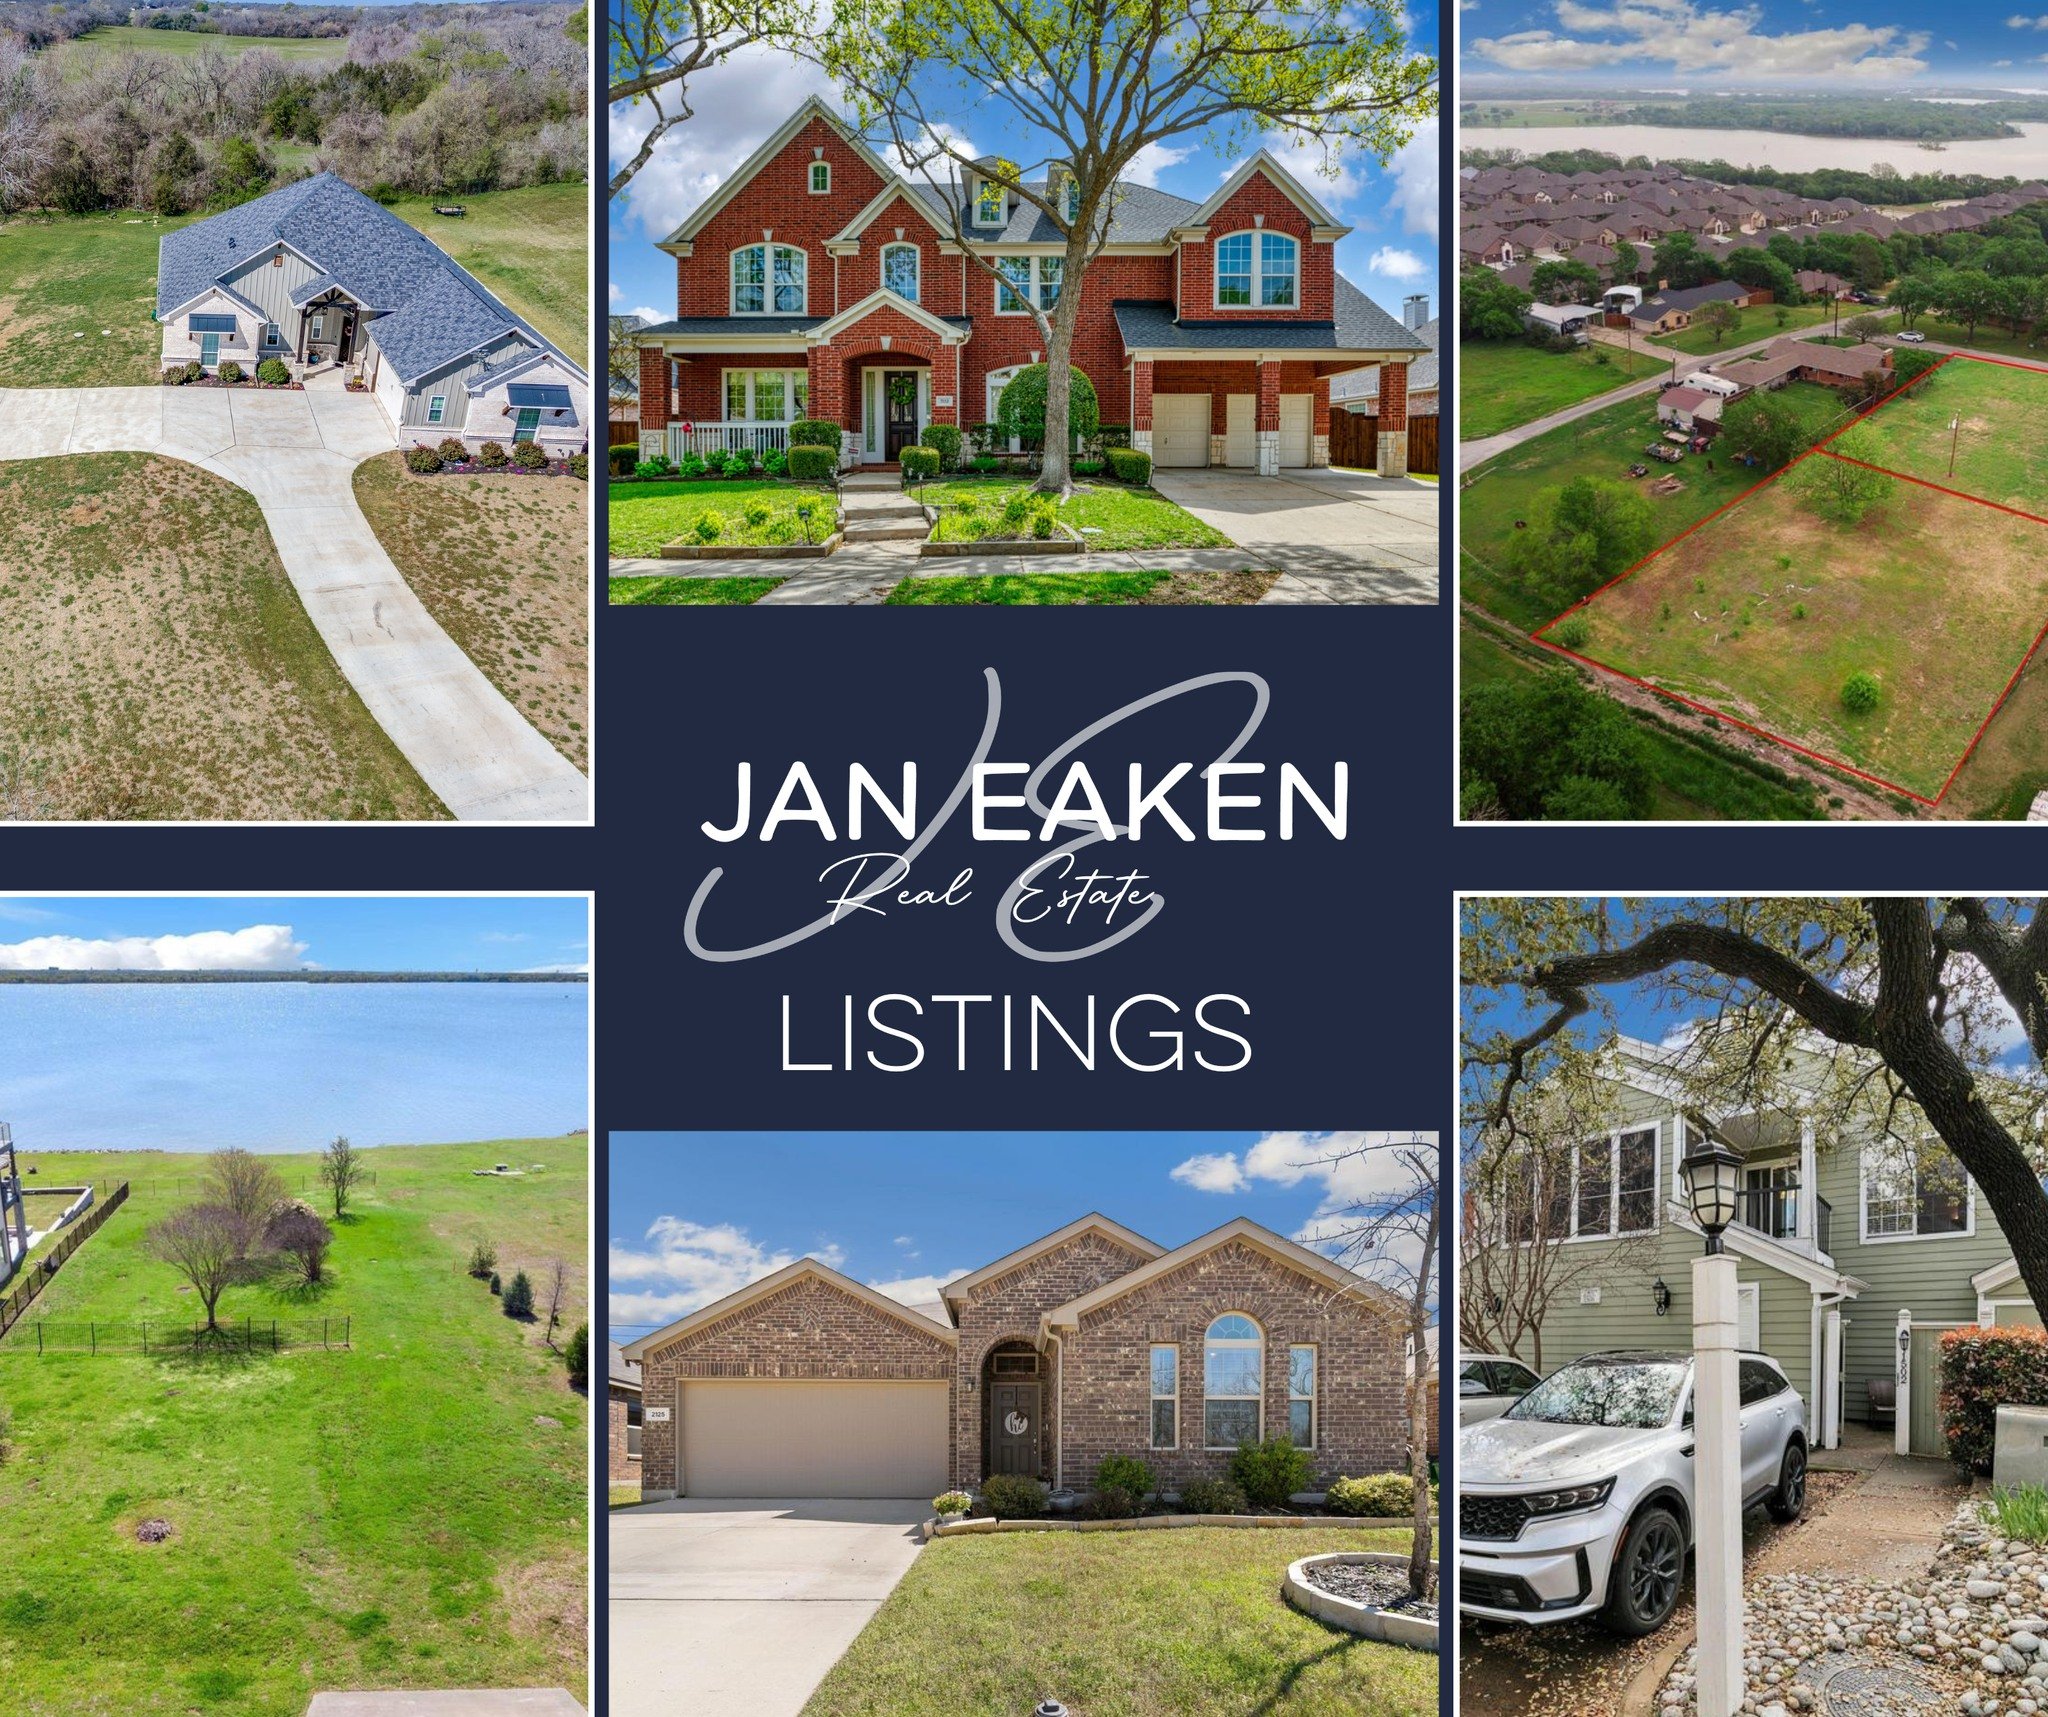 🏡 Ready to find your dream home? Schedule a showing of any of these amazing properties in the bustling DFW area! Homes available in McKinney, Azle, Crossroads and Dallas. Properties available in Little Elm and Lakewood Village. See listings here: ww